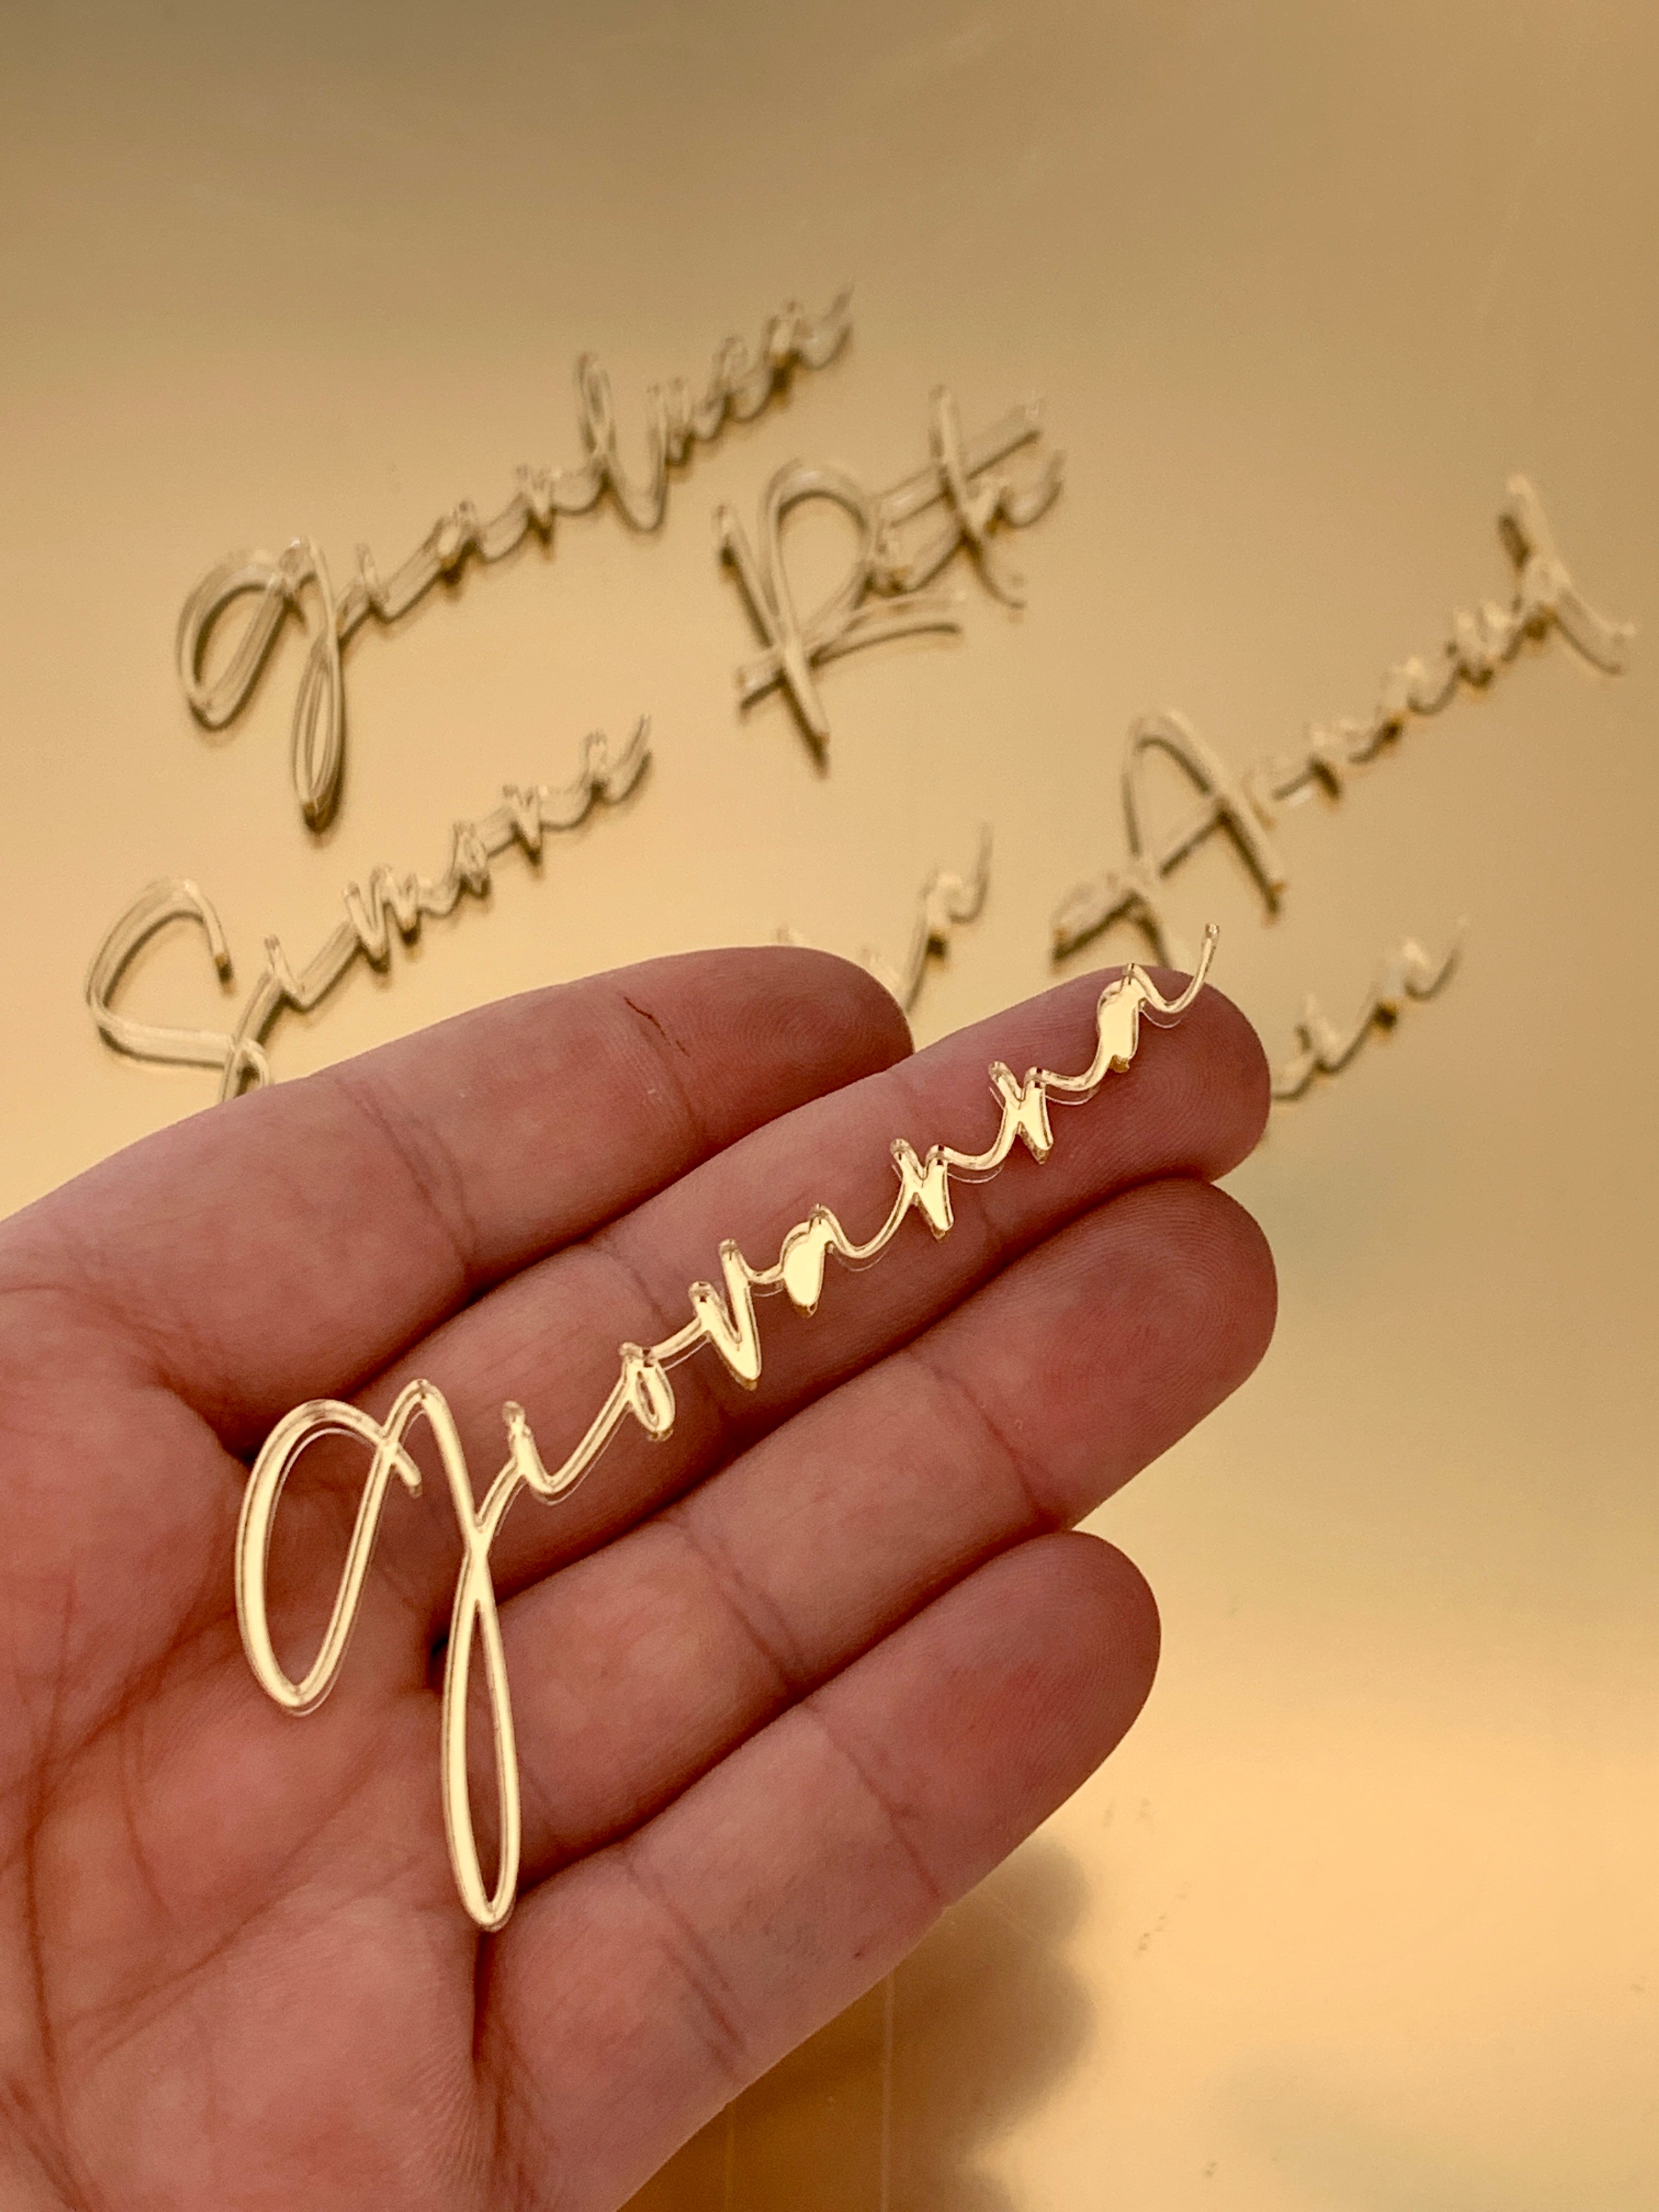 Names in gold plexiglass with calligraphic font - wedding place cards